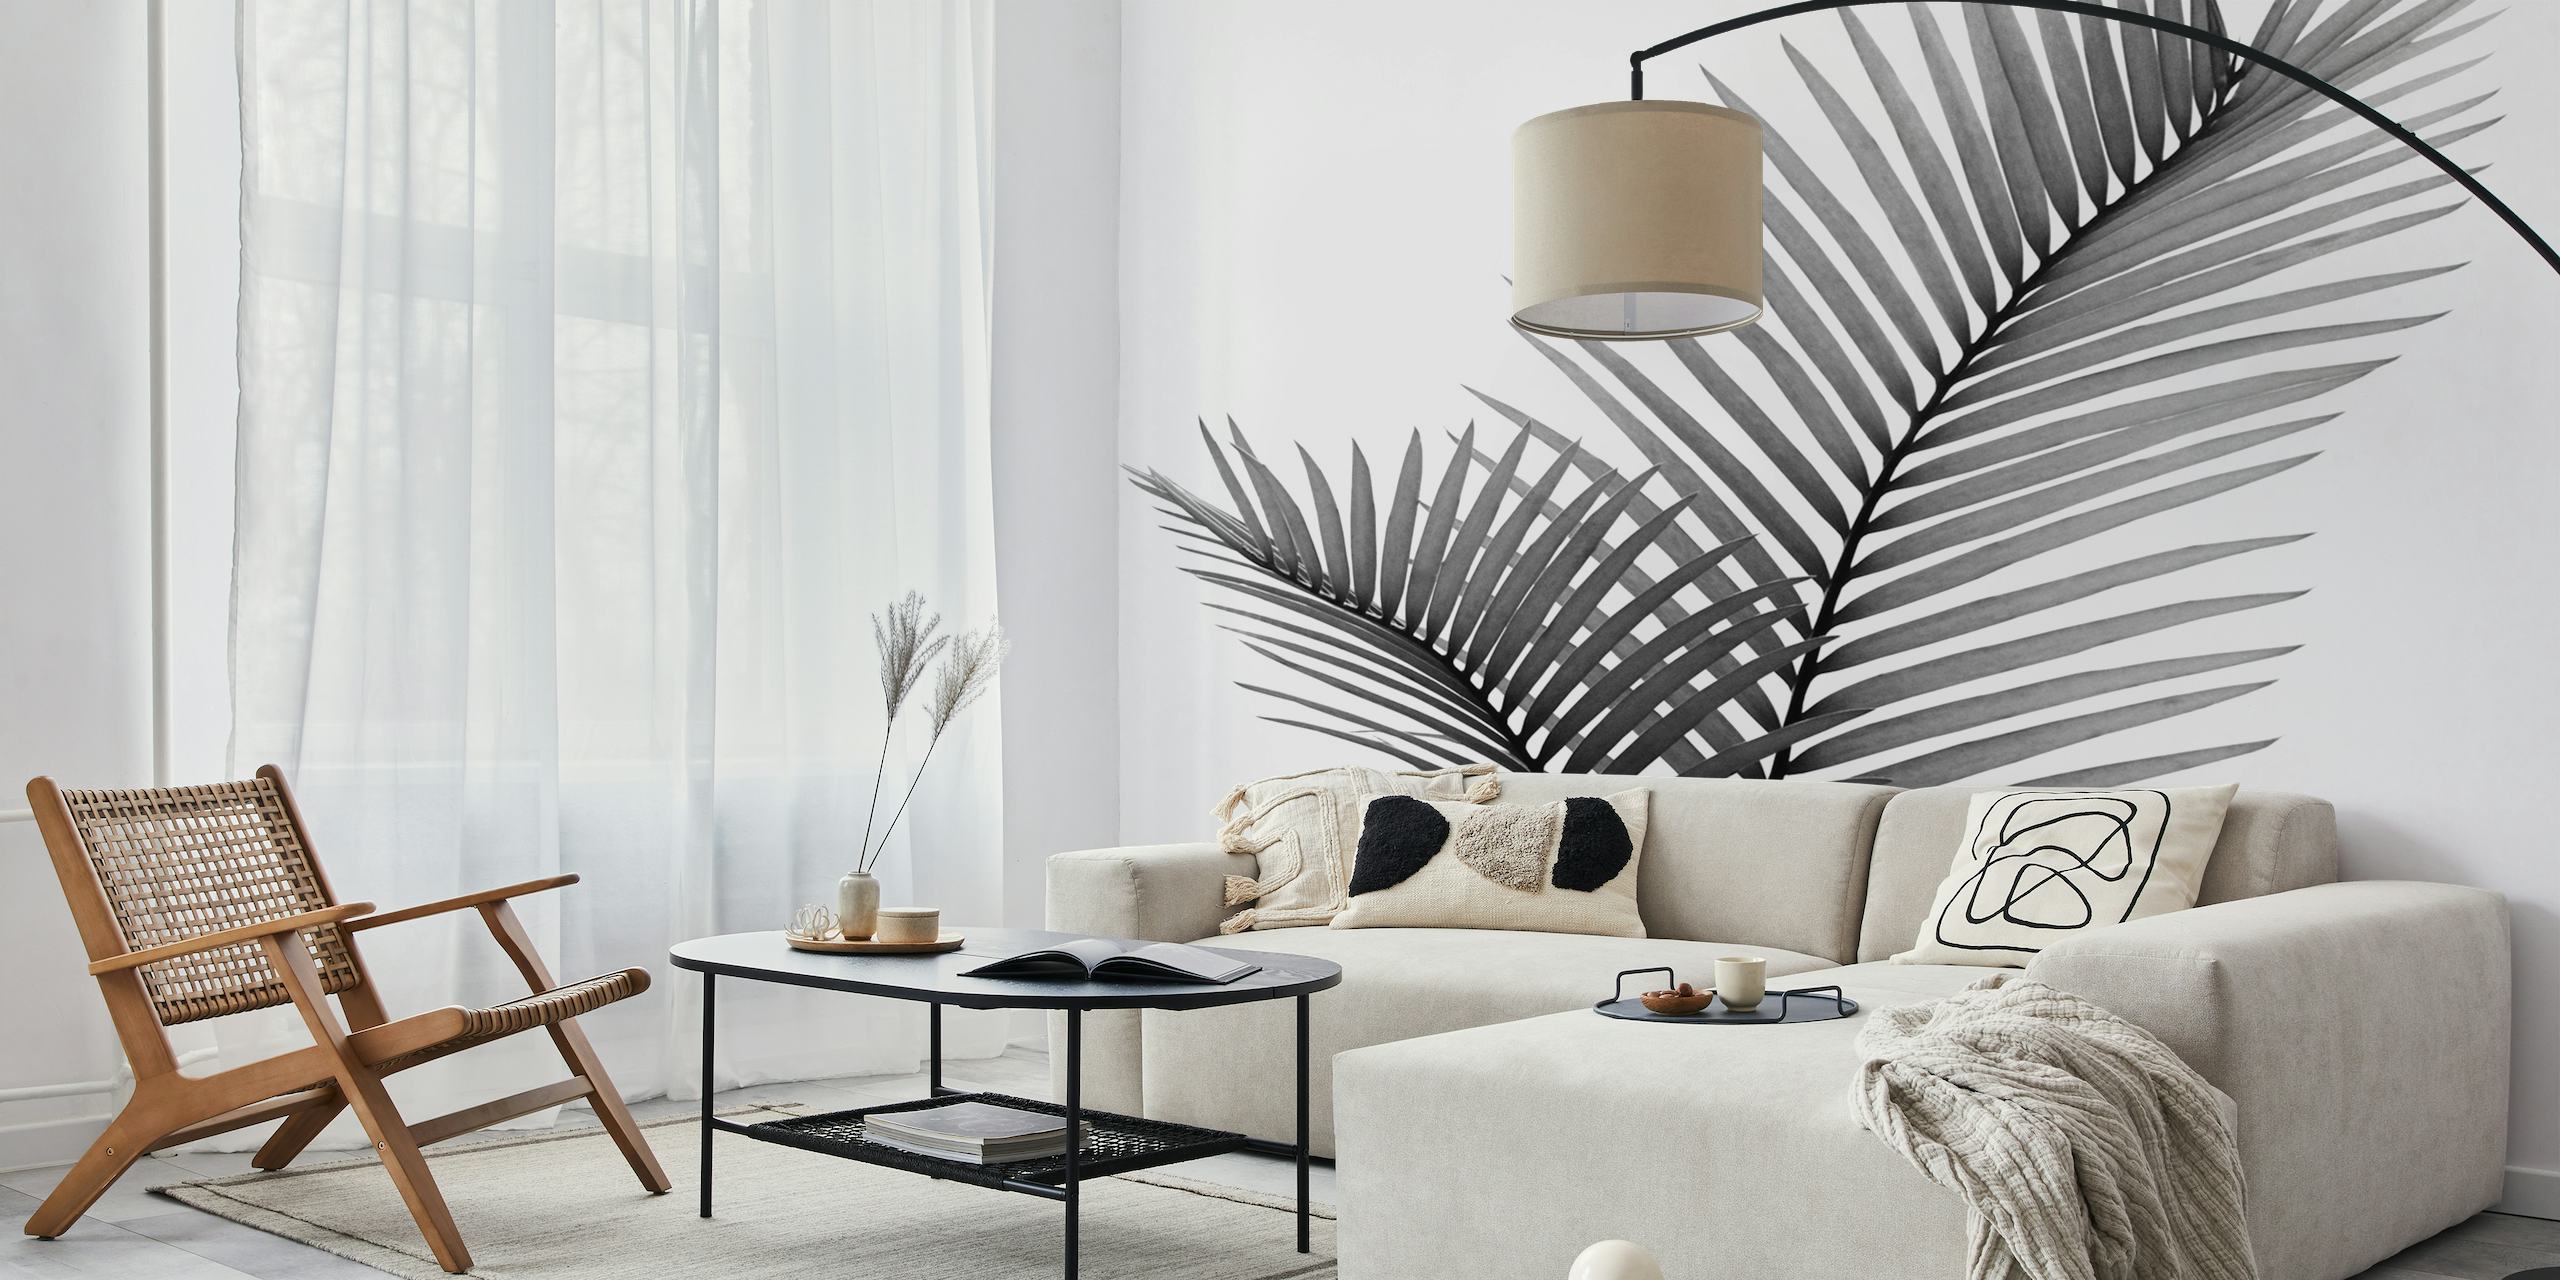 Monochrome intertwined palm leaves wall mural design